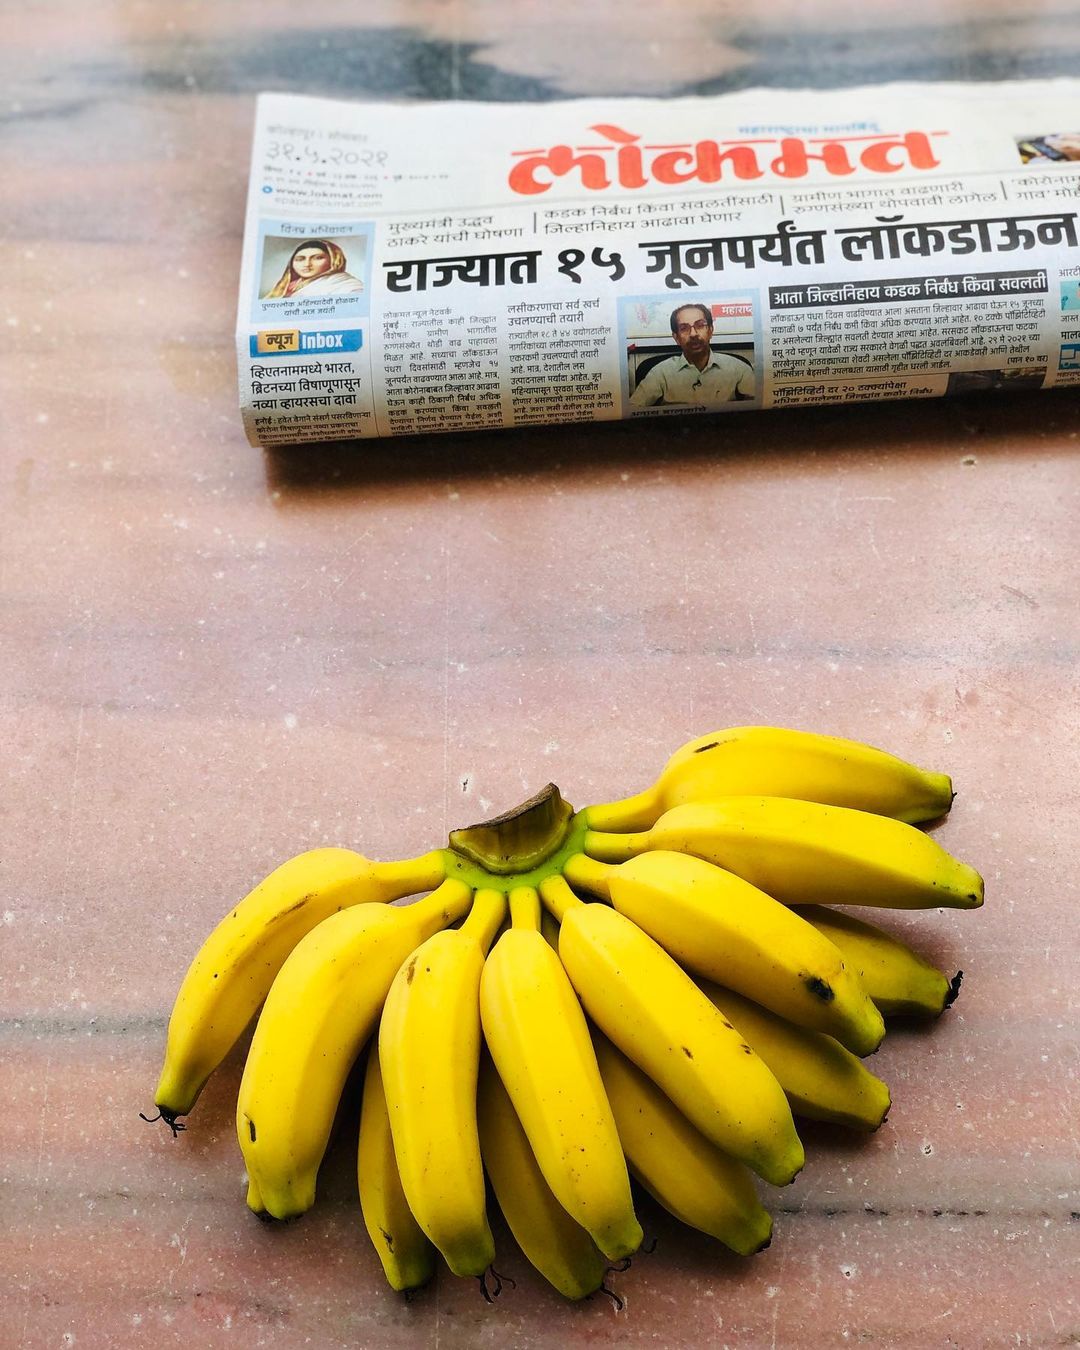 Relishing the Marathi newspaper and Elaichi Banana combo one last time before returning home ........

We generally savour the big, yellow and slightly ripe bananas; however, you may have come across tiny and dwarf sized bananas that are sweeter. This variety is known as Elaichi Banana

These small bananas are rich in Vitamin C and full of potassium which makes it an ideal post-workout snack. they are good source of carbohydrates – the good ones. Locally produced elaichi bananas tend to be more nutritious and delicious.
#elaichibanana #seasonalfruit #banana #localfood #thinklocal #eatlocal